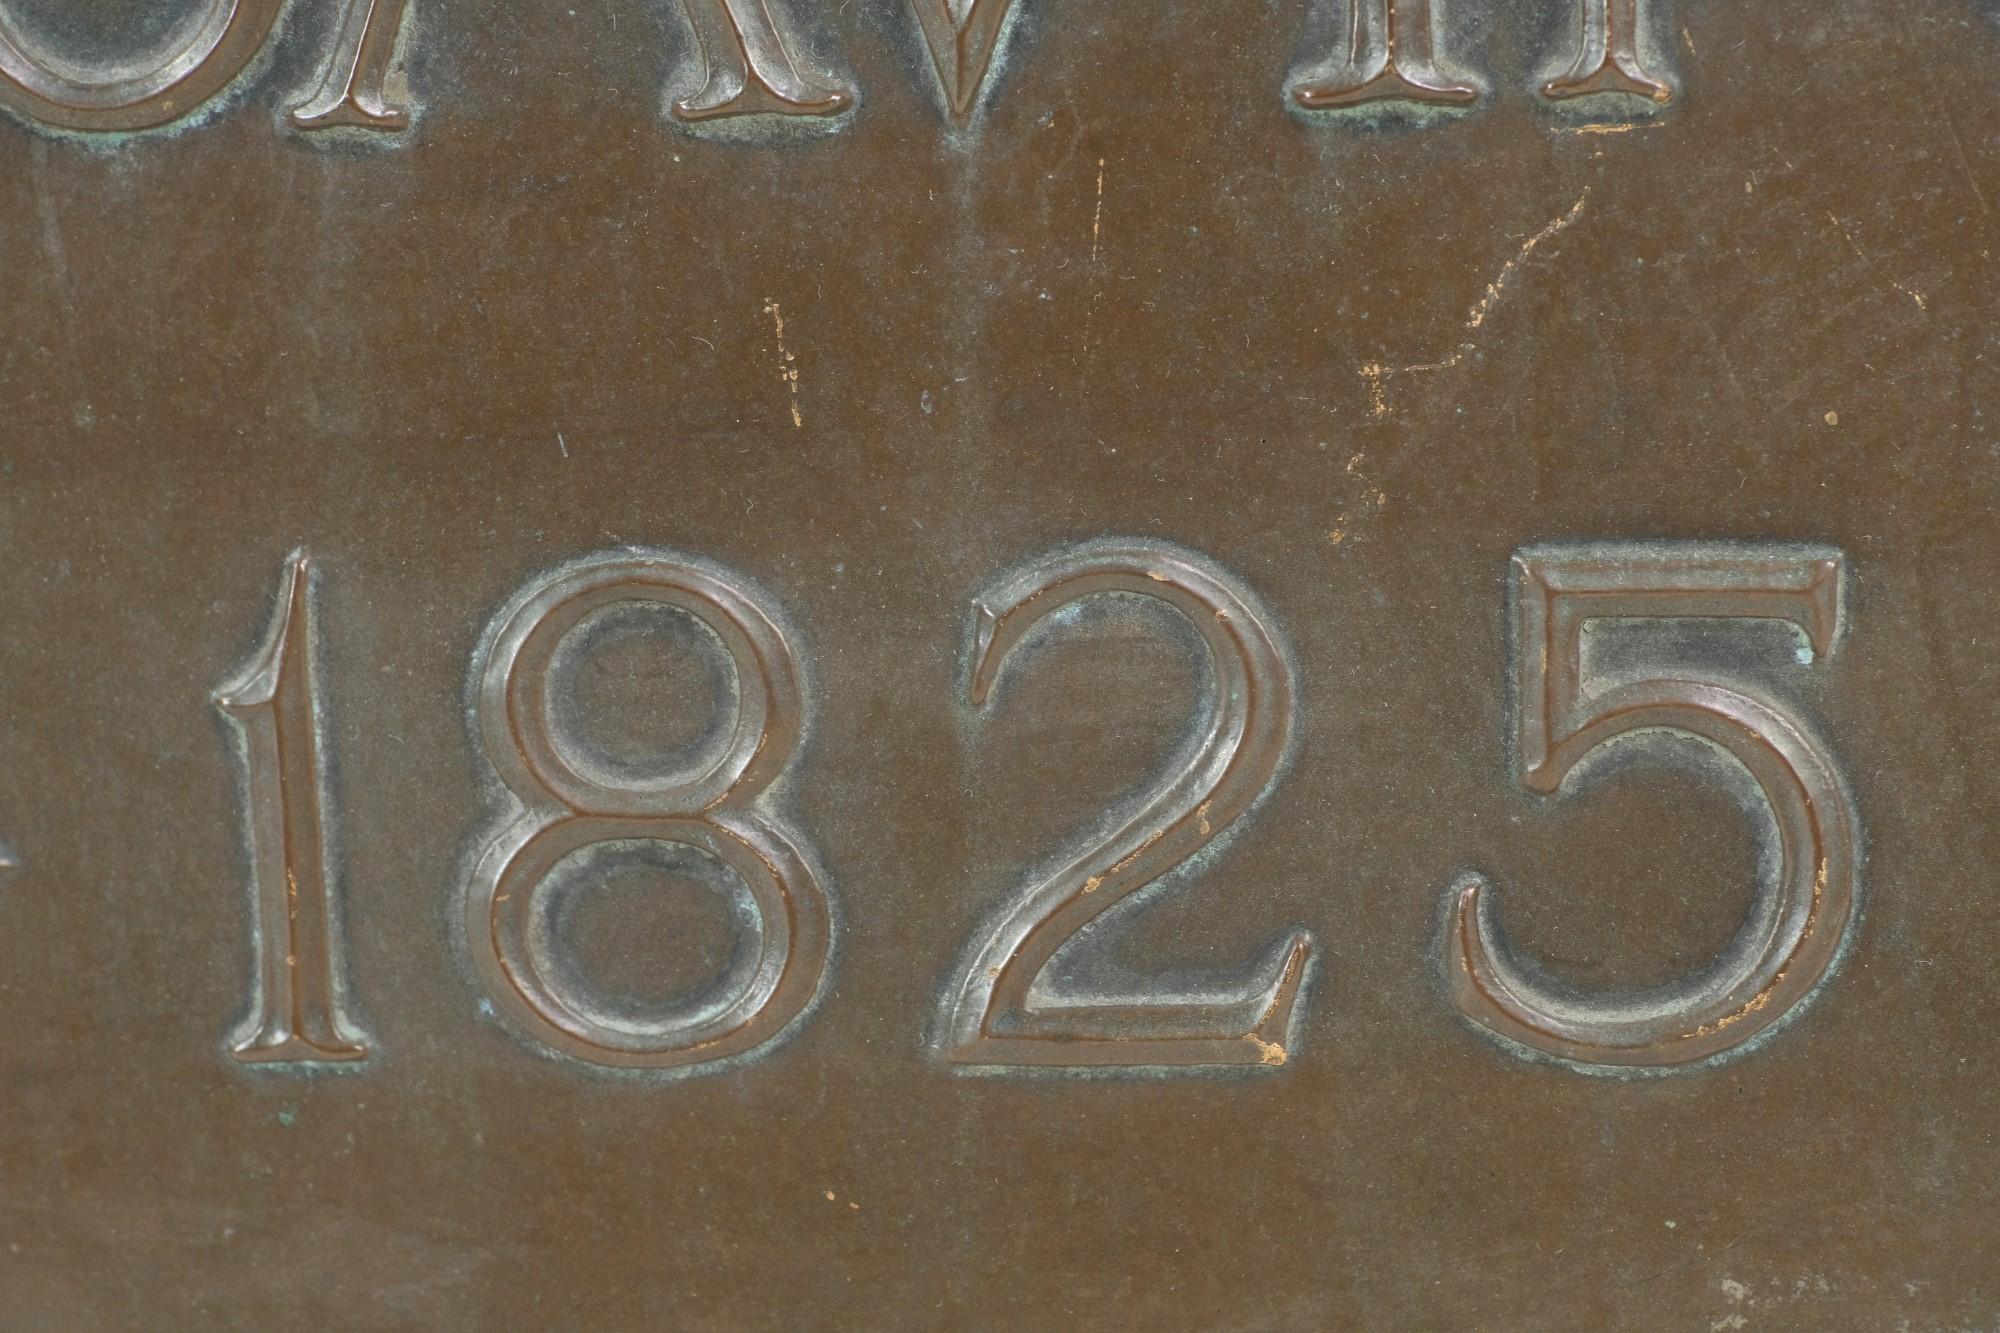 1825 bronze bank plaque with raised lettering and original dark patina. This can be seen at our 400 Gilligan St location in Scranton, PA.